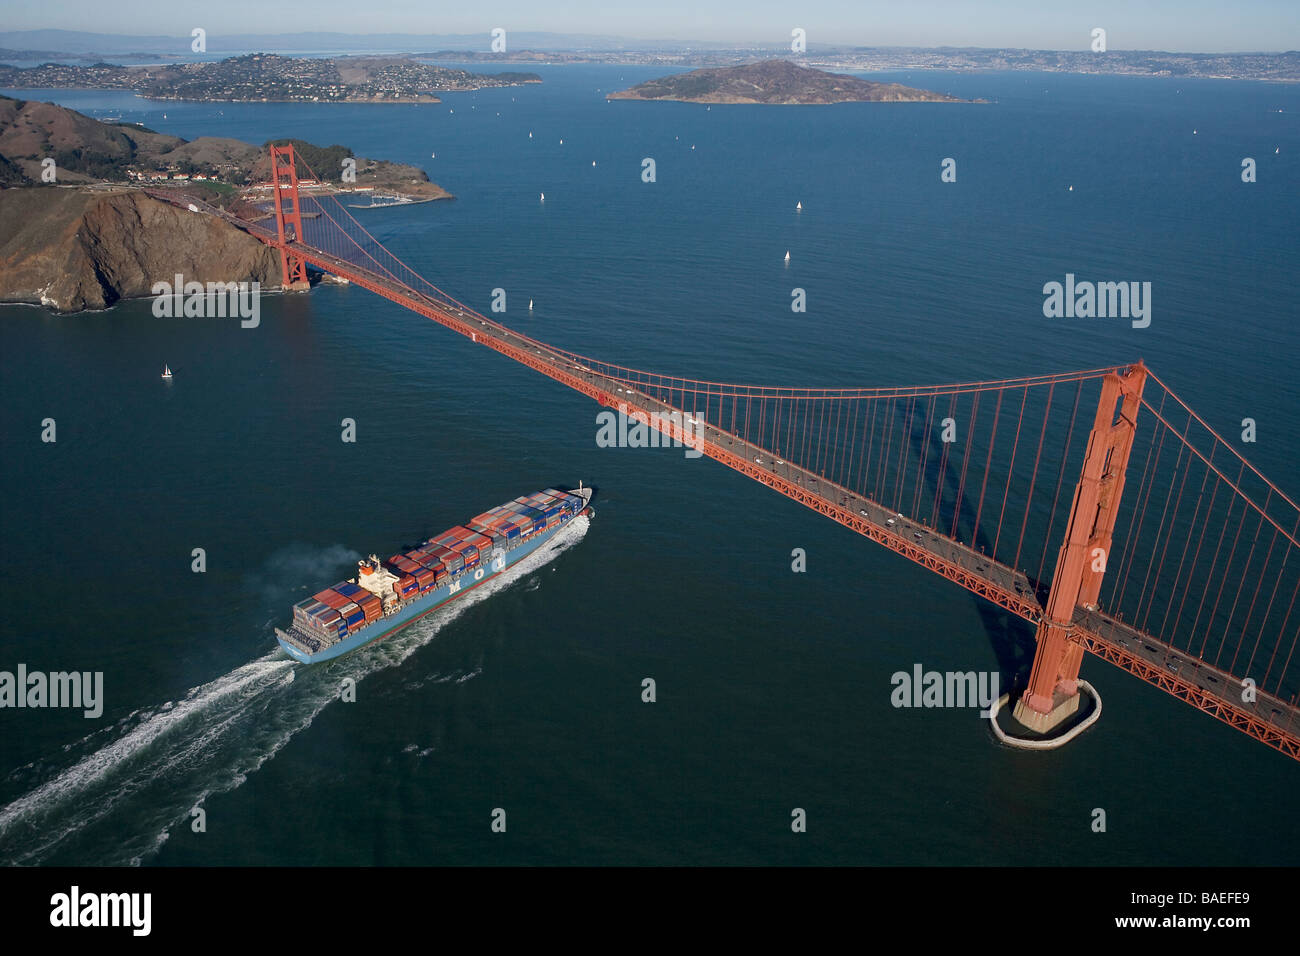 aerial view above loaded MOL container ship passing under the Golden Gate bridge into San Francisco Bay Stock Photo